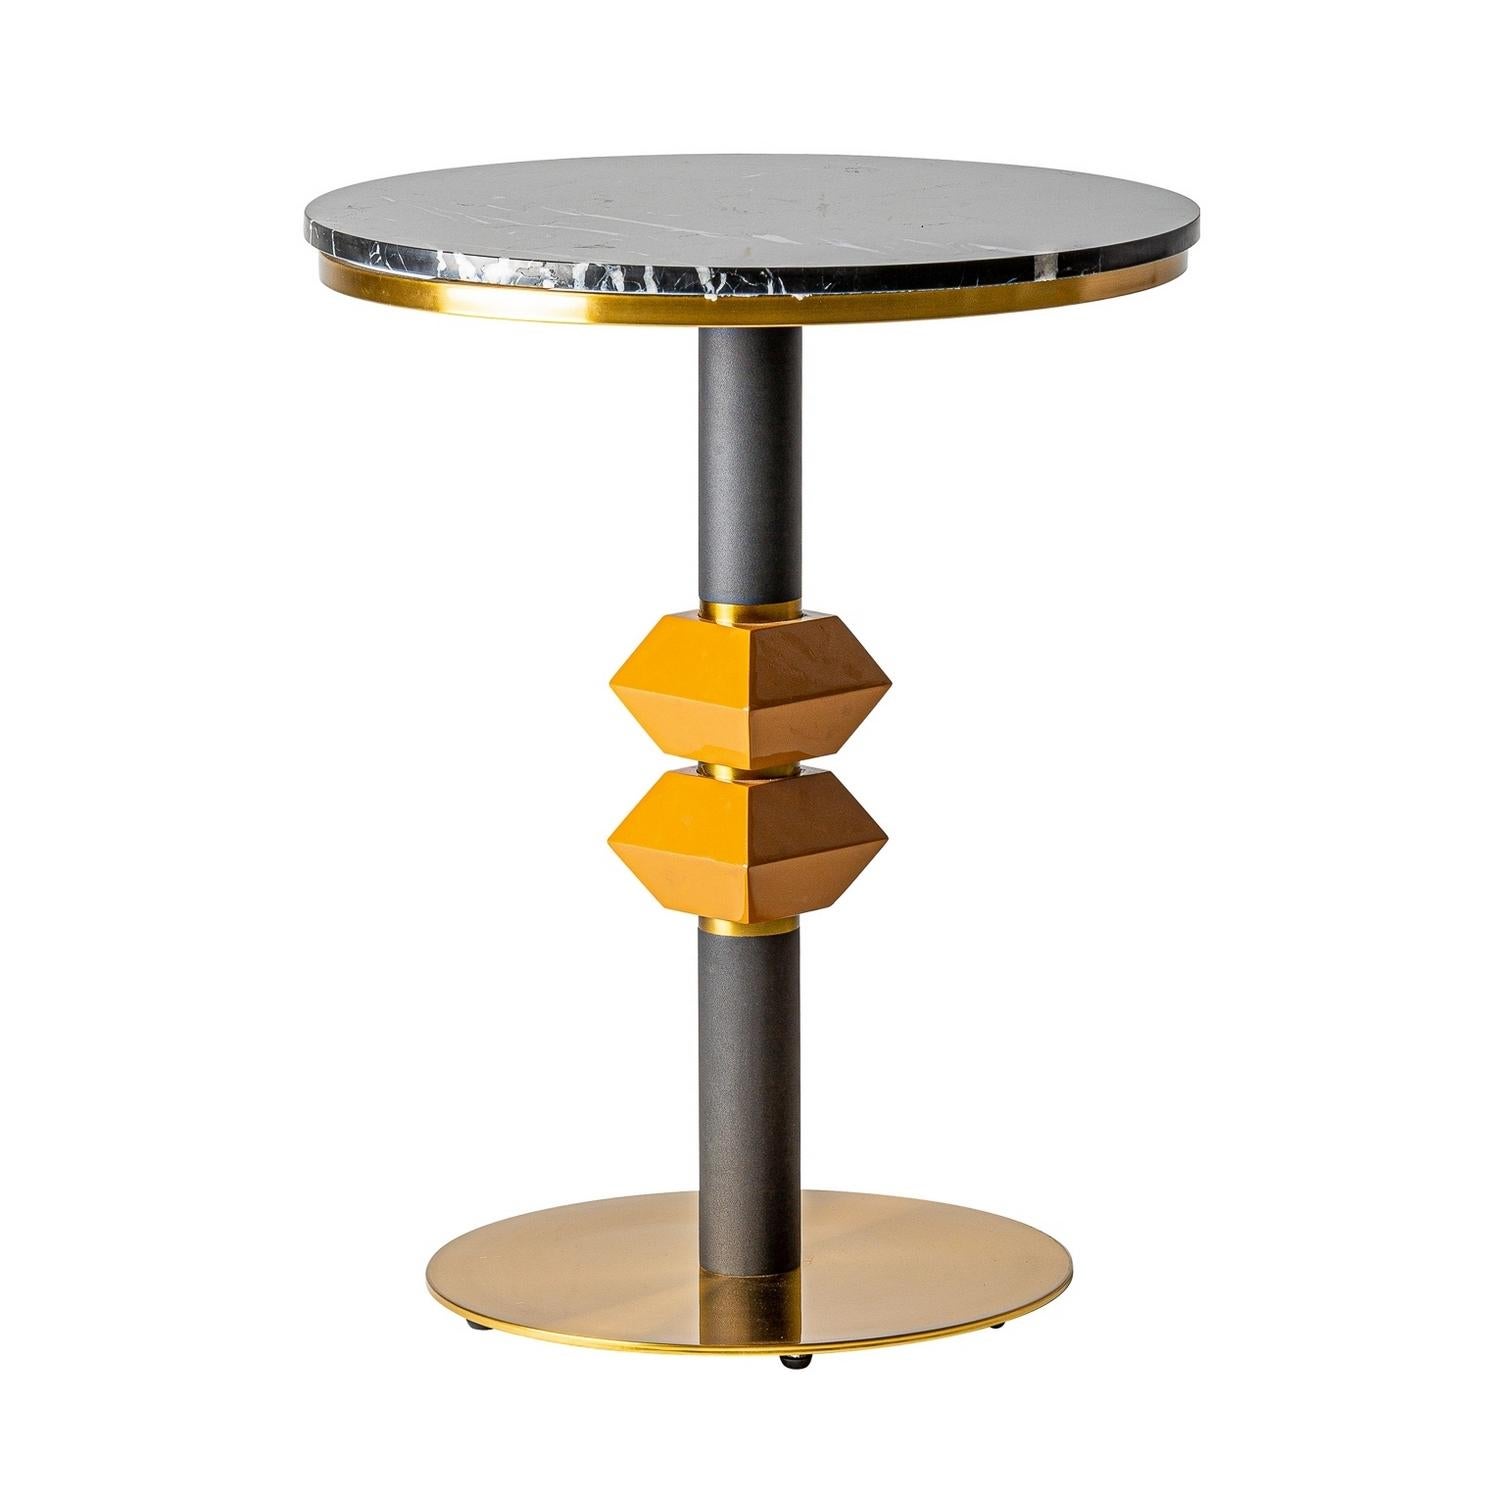 1980s Italian Design Style Round Black Marble and Gilt Pedestal Table In New Condition For Sale In Tourcoing, FR